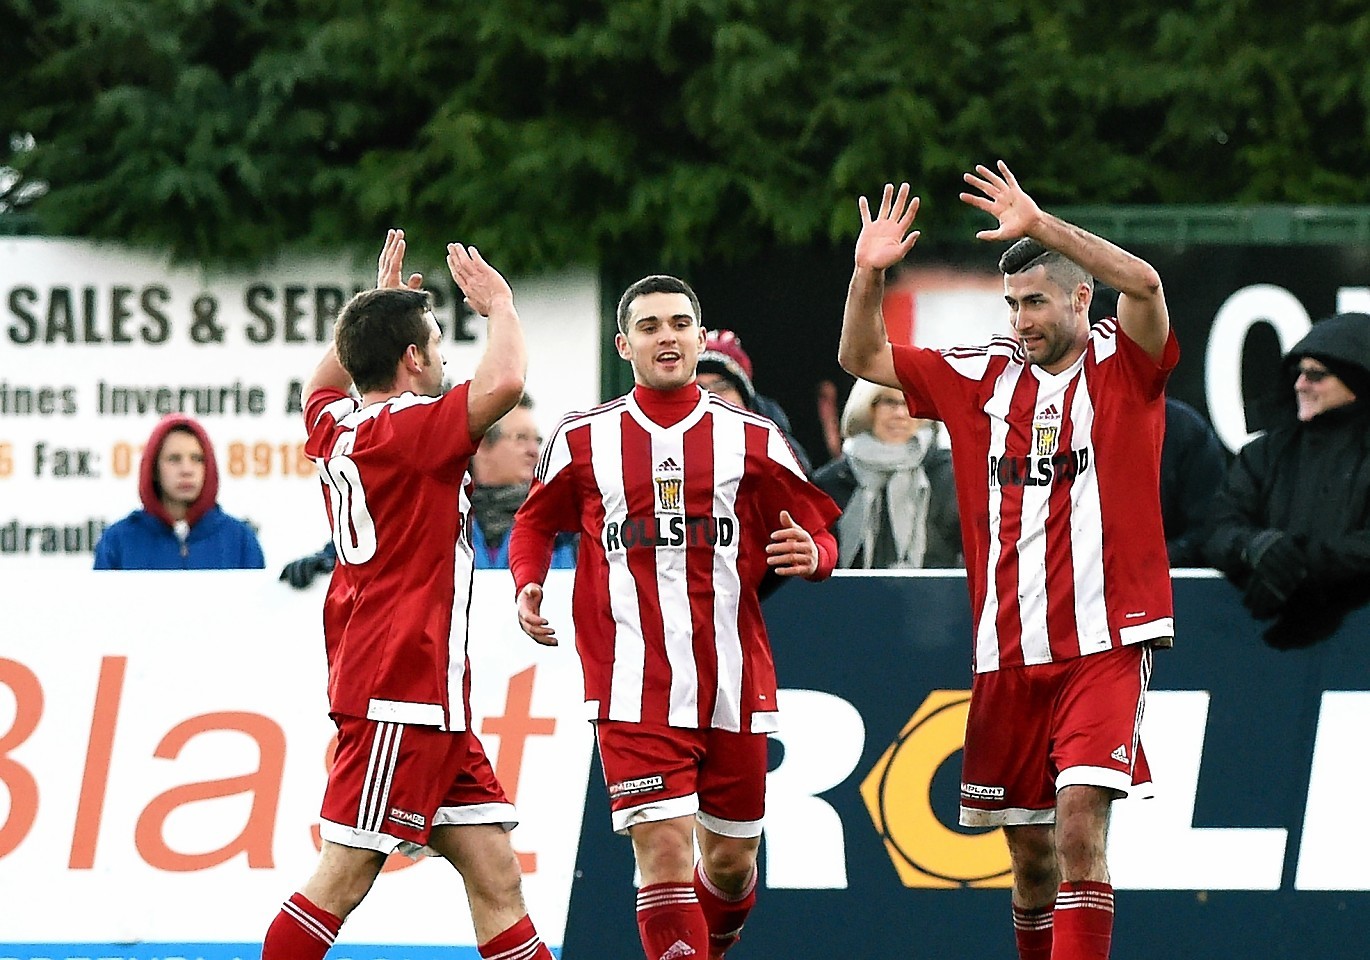 Formartine's Cammy Keith celebates with team-mates after scoring in the first half